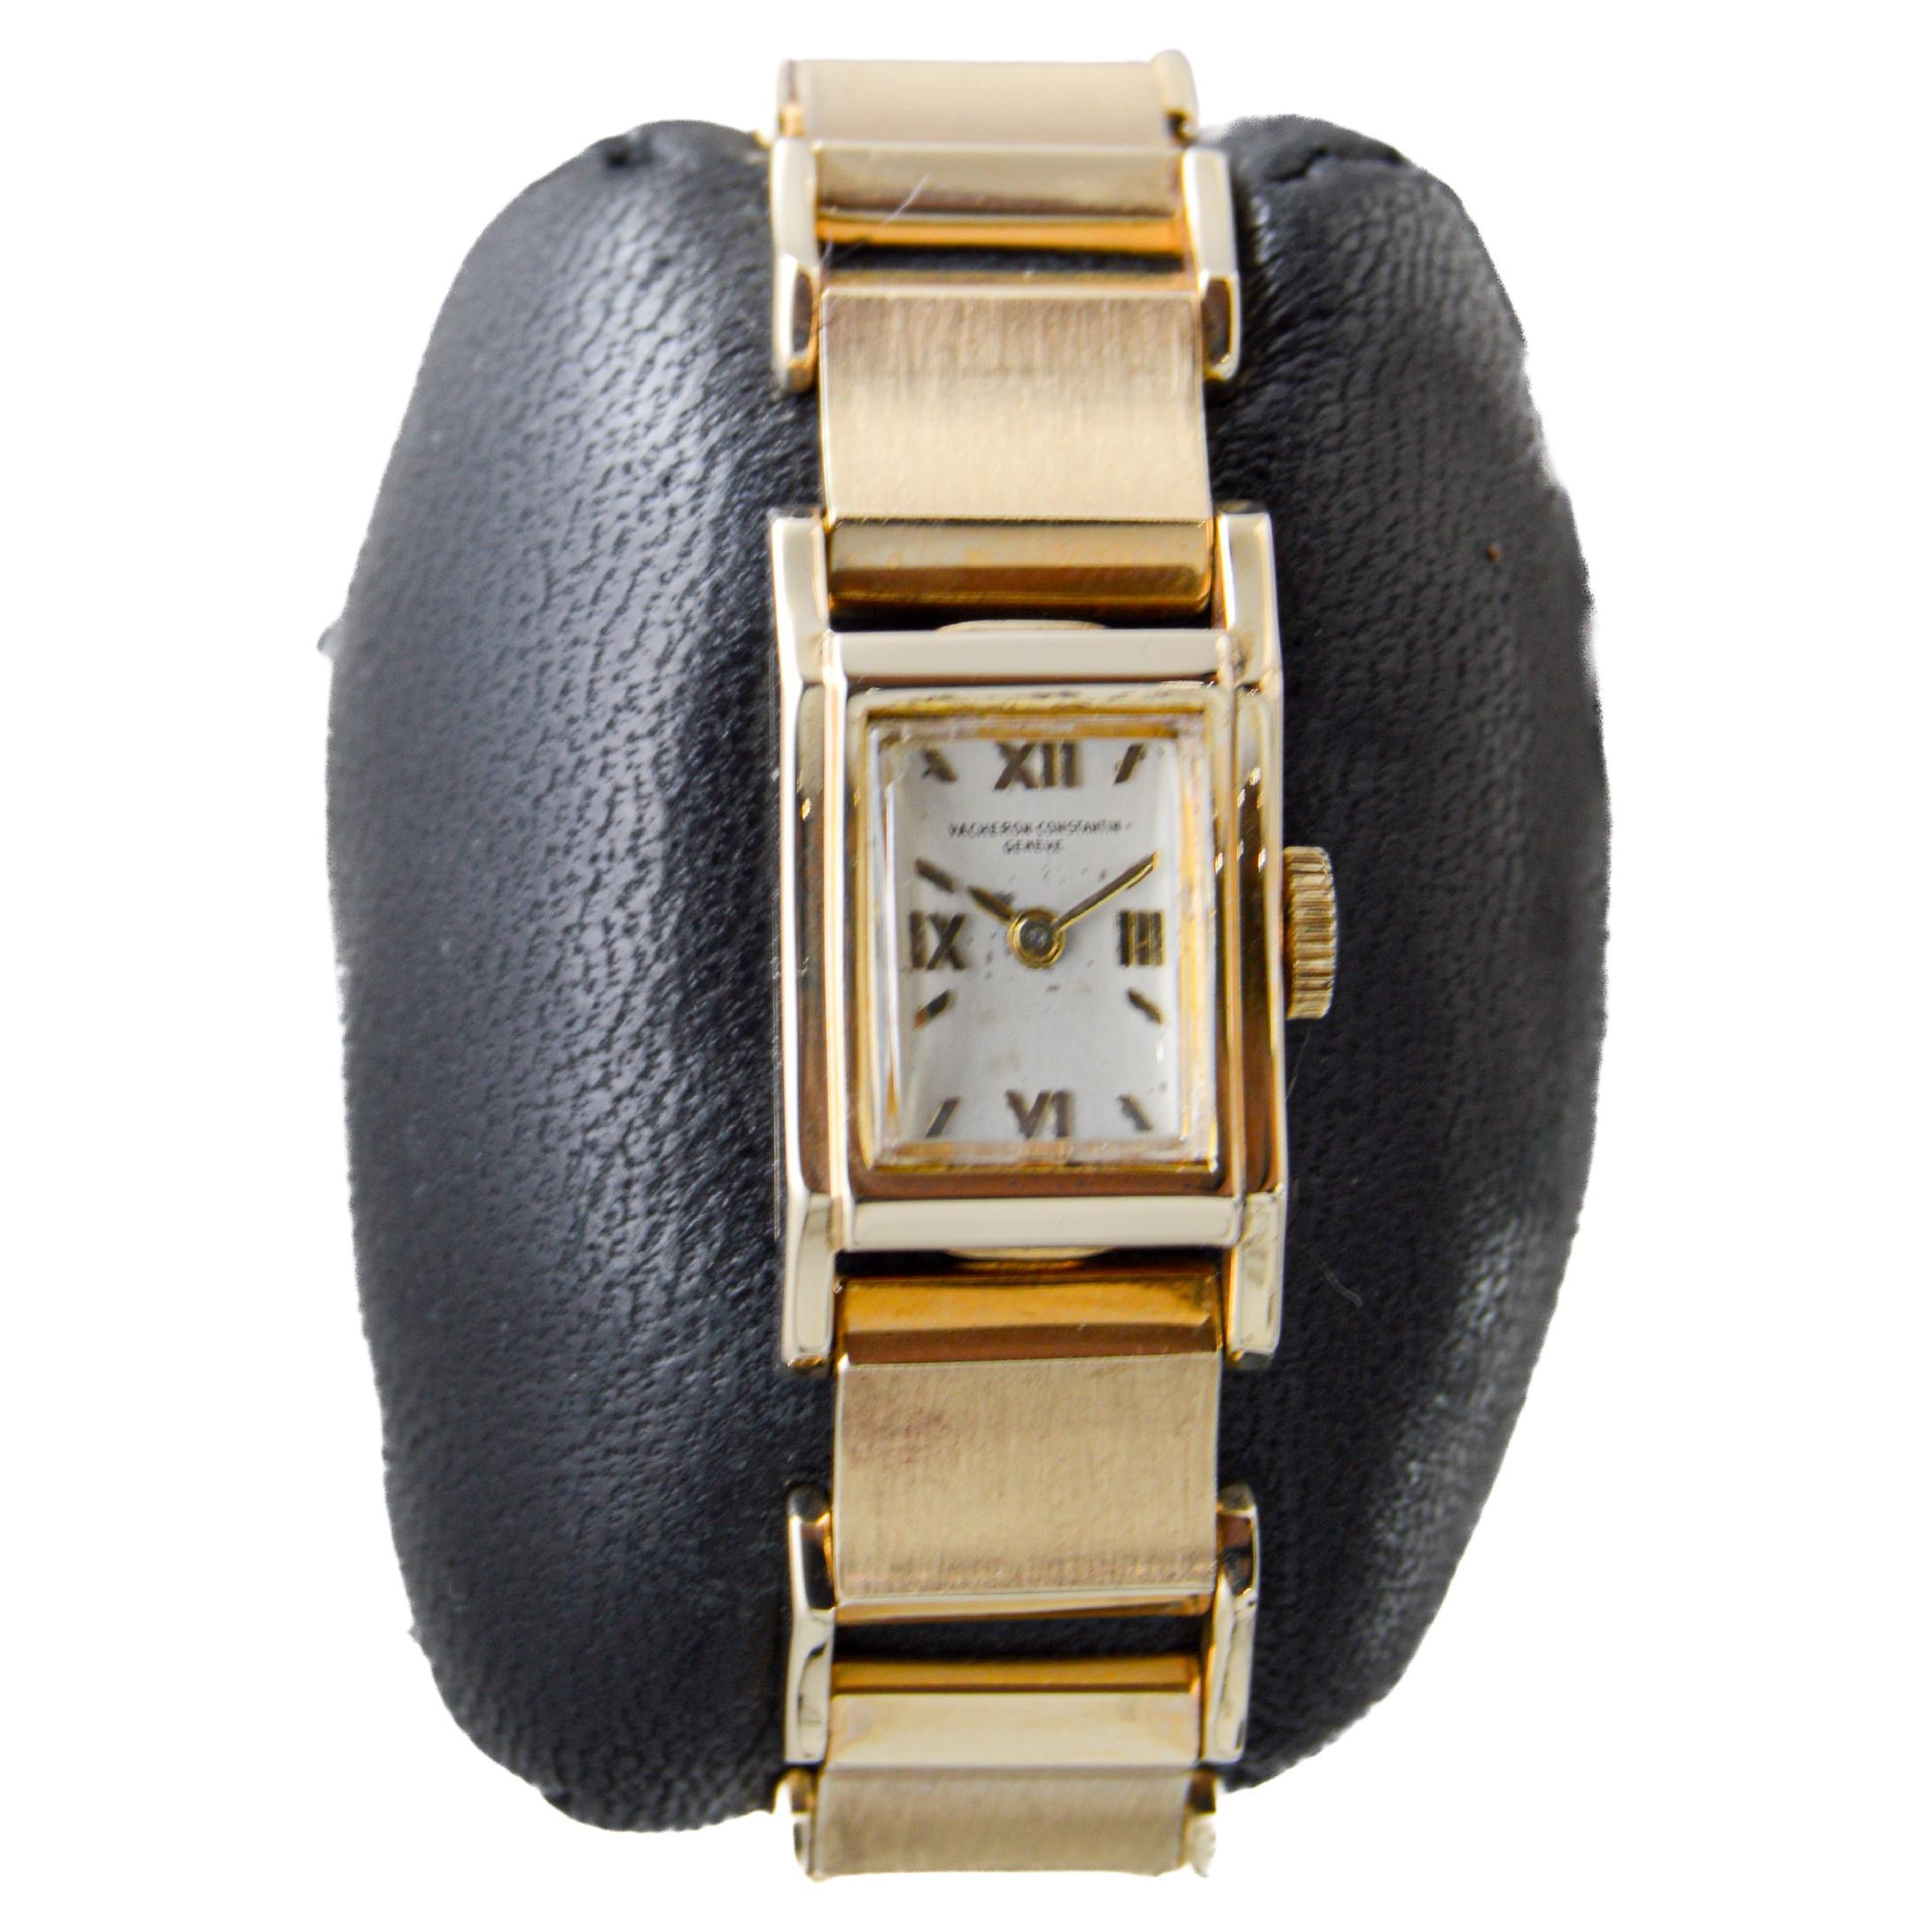 FACTORY / HOUSE: Vacheron & Constantin Watch Company
STYLE / REFERENCE: Art Deco Bracelet Style 
METAL / MATERIAL: 14Kt. Solid Gold 
DIMENSIONS: Length 25mm  X Width 14mm
CIRCA: 1940's
MOVEMENT / CALIBER: Manual Winding / 17 Jewels
DIAL / HANDS: